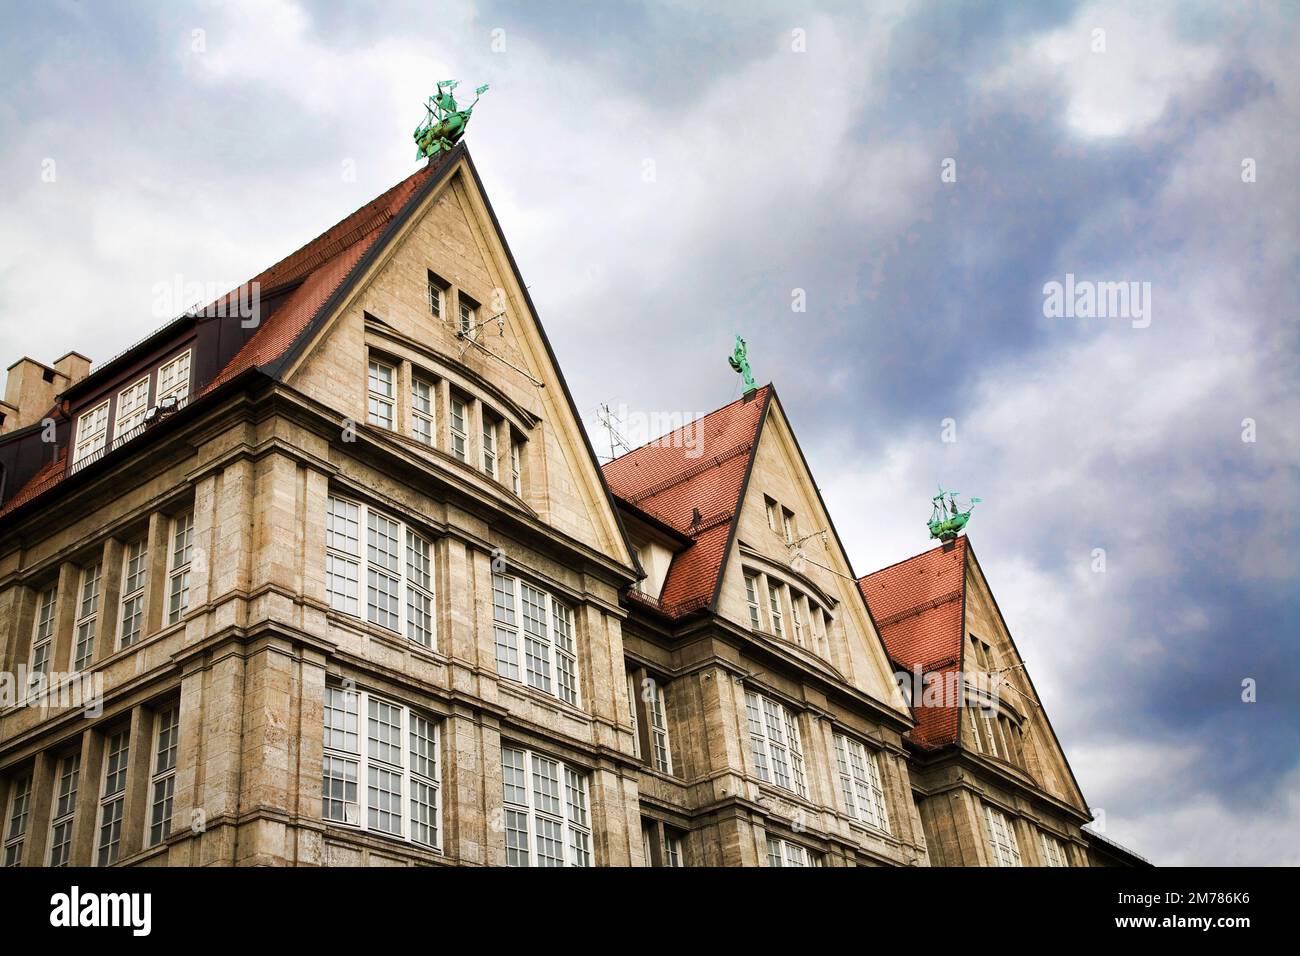 The Kaufhaus Oberpollinger in old center of Munich, Germany. Stock Photo